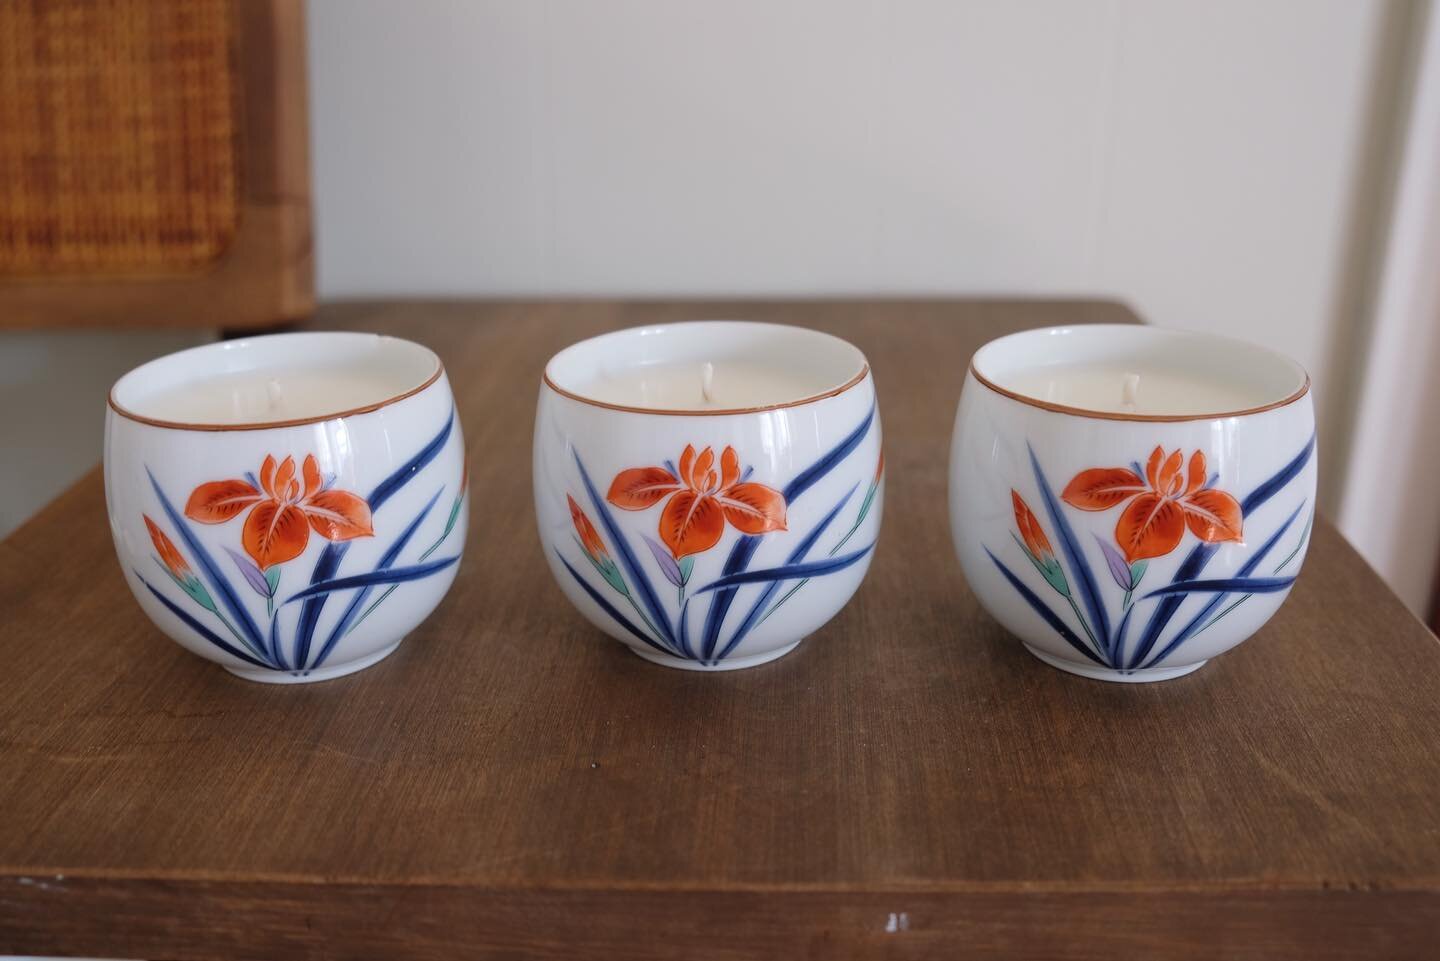 SOLD OUT - orange and blue round floral sake cups! $10 each plus shipping. There are a couple minor chips on these - swipe for photos. Comment SOLD to claim!